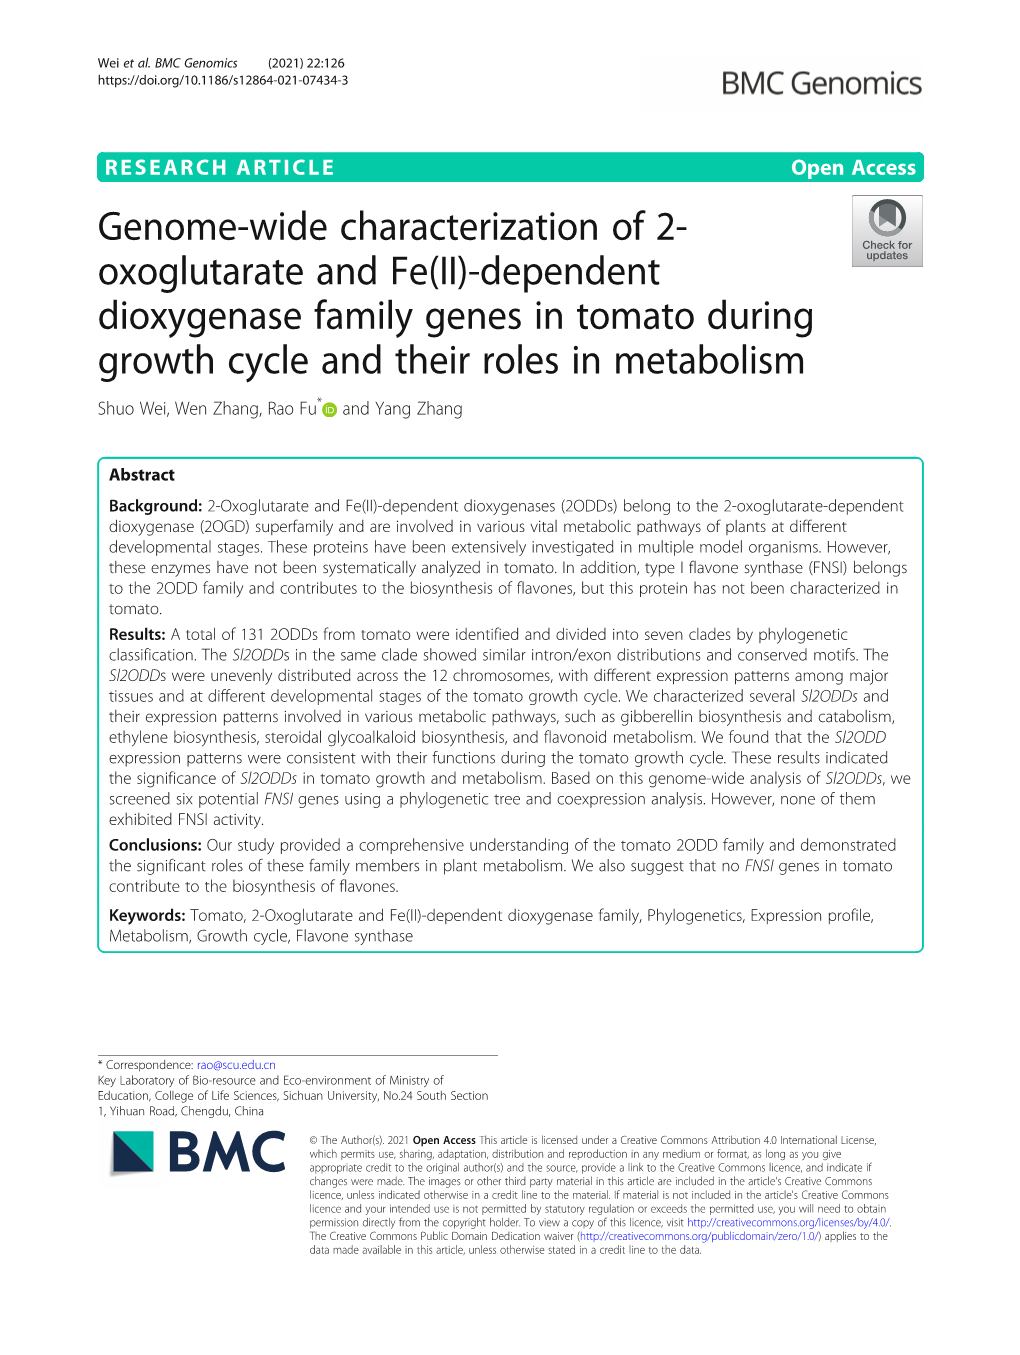 Genome-Wide Characterization of 2-Oxoglutarate and Fe(II